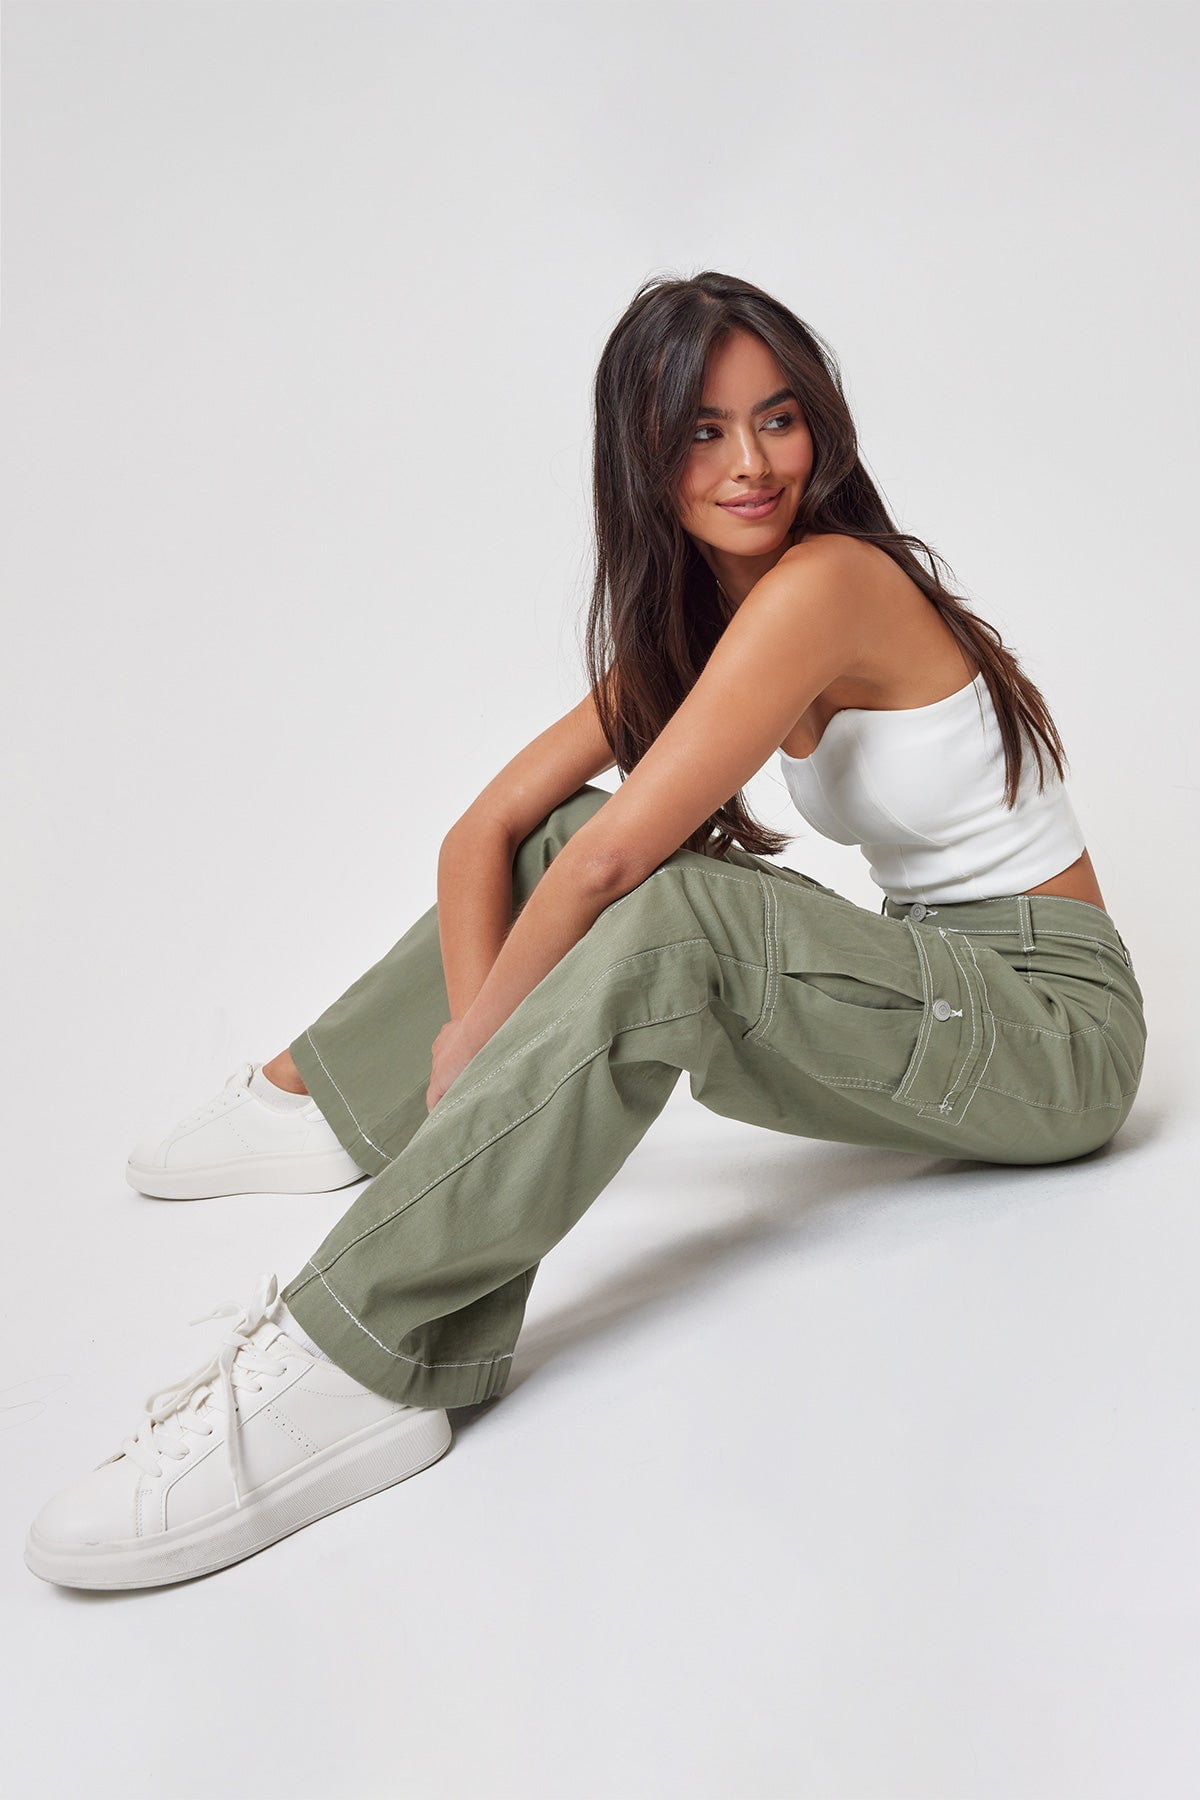 me Women's Tailored Cargo Pants - Sage Green - Size 10